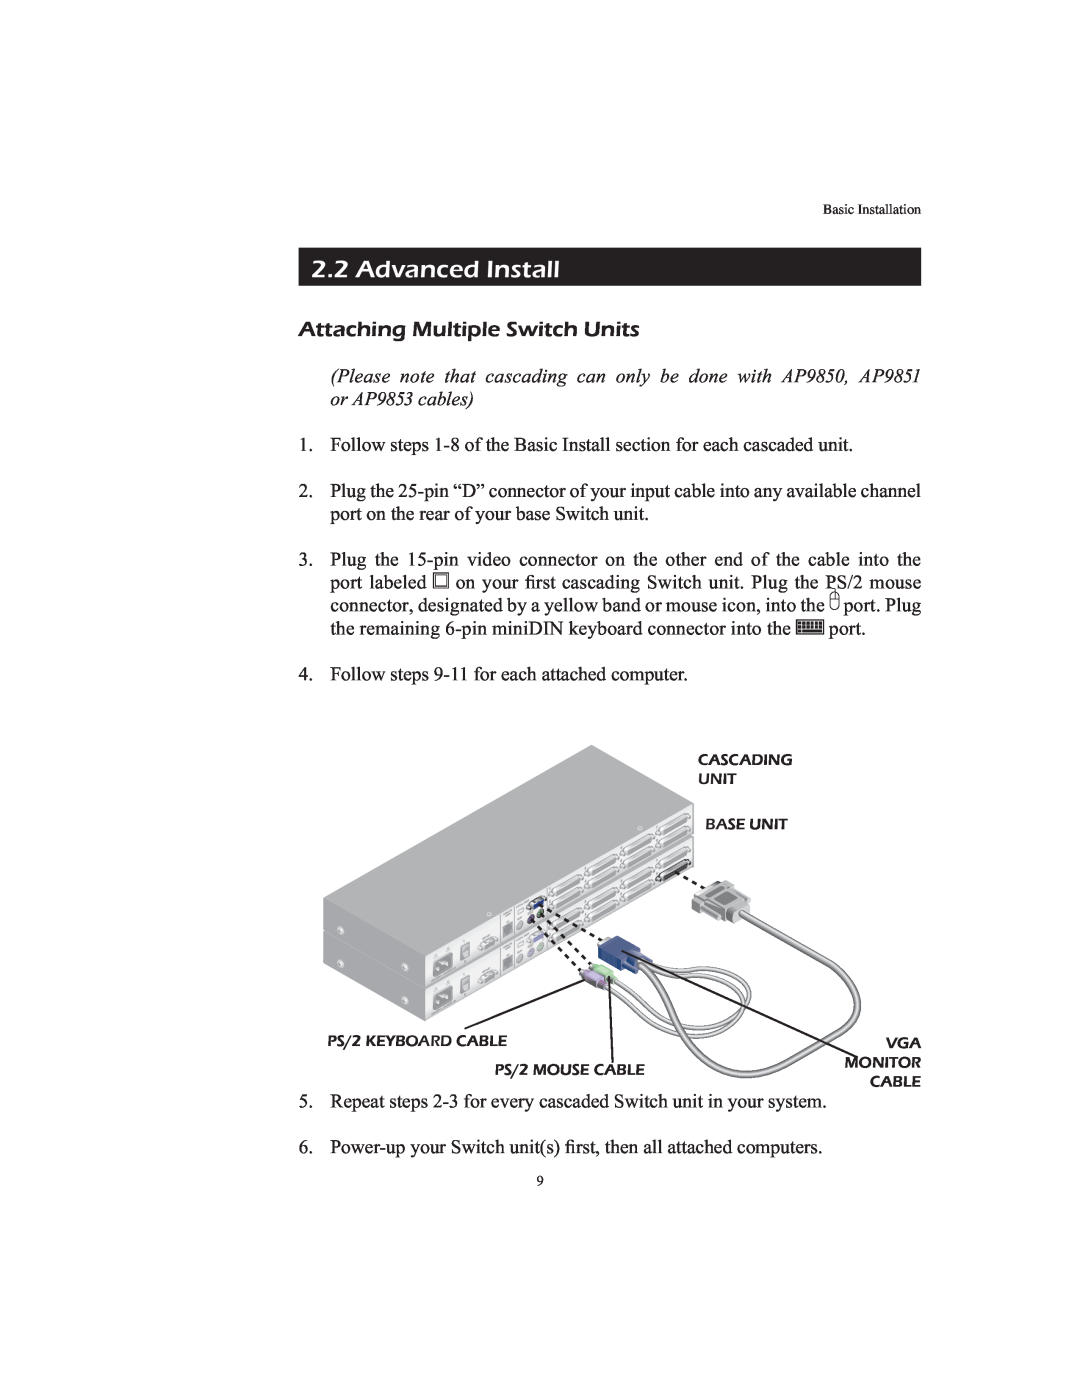 APC AP9268 manual Advanced Install, Attaching Multiple Switch Units 